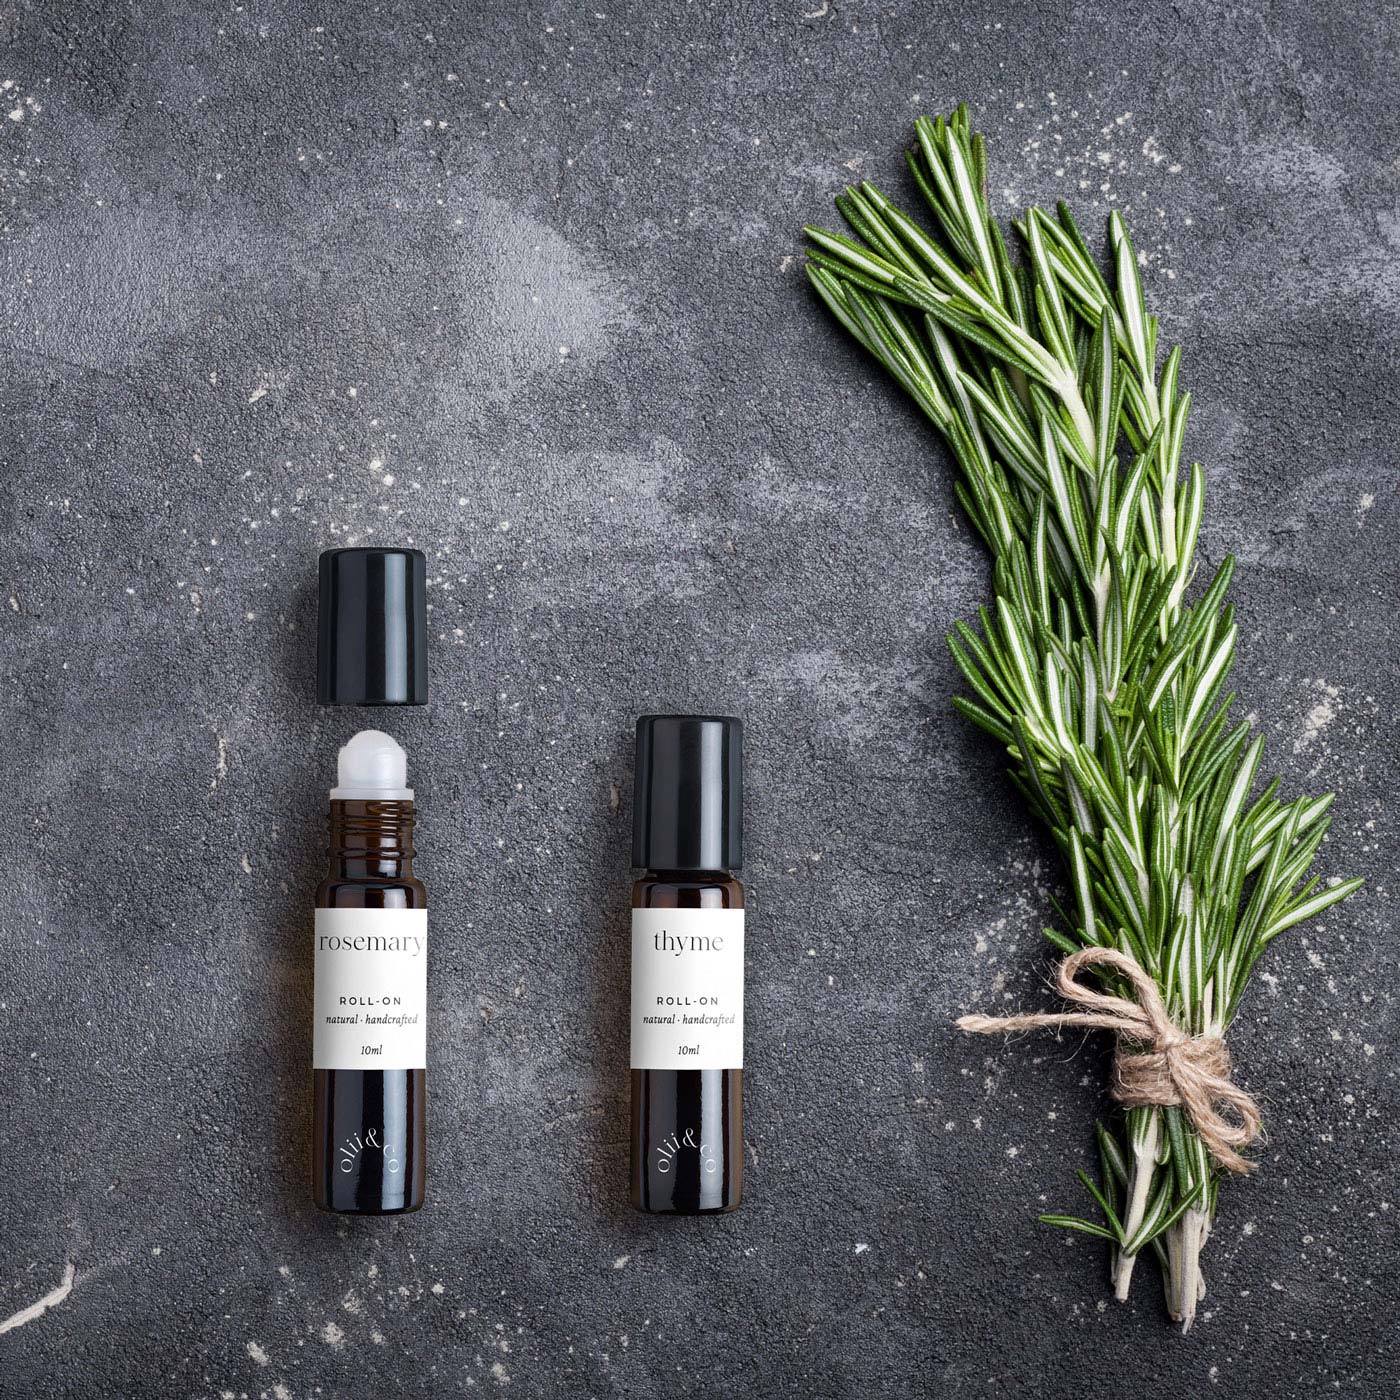 Karolina Król Studio simple brand and sustainable packaging design for roll-on bottles of essential oils 